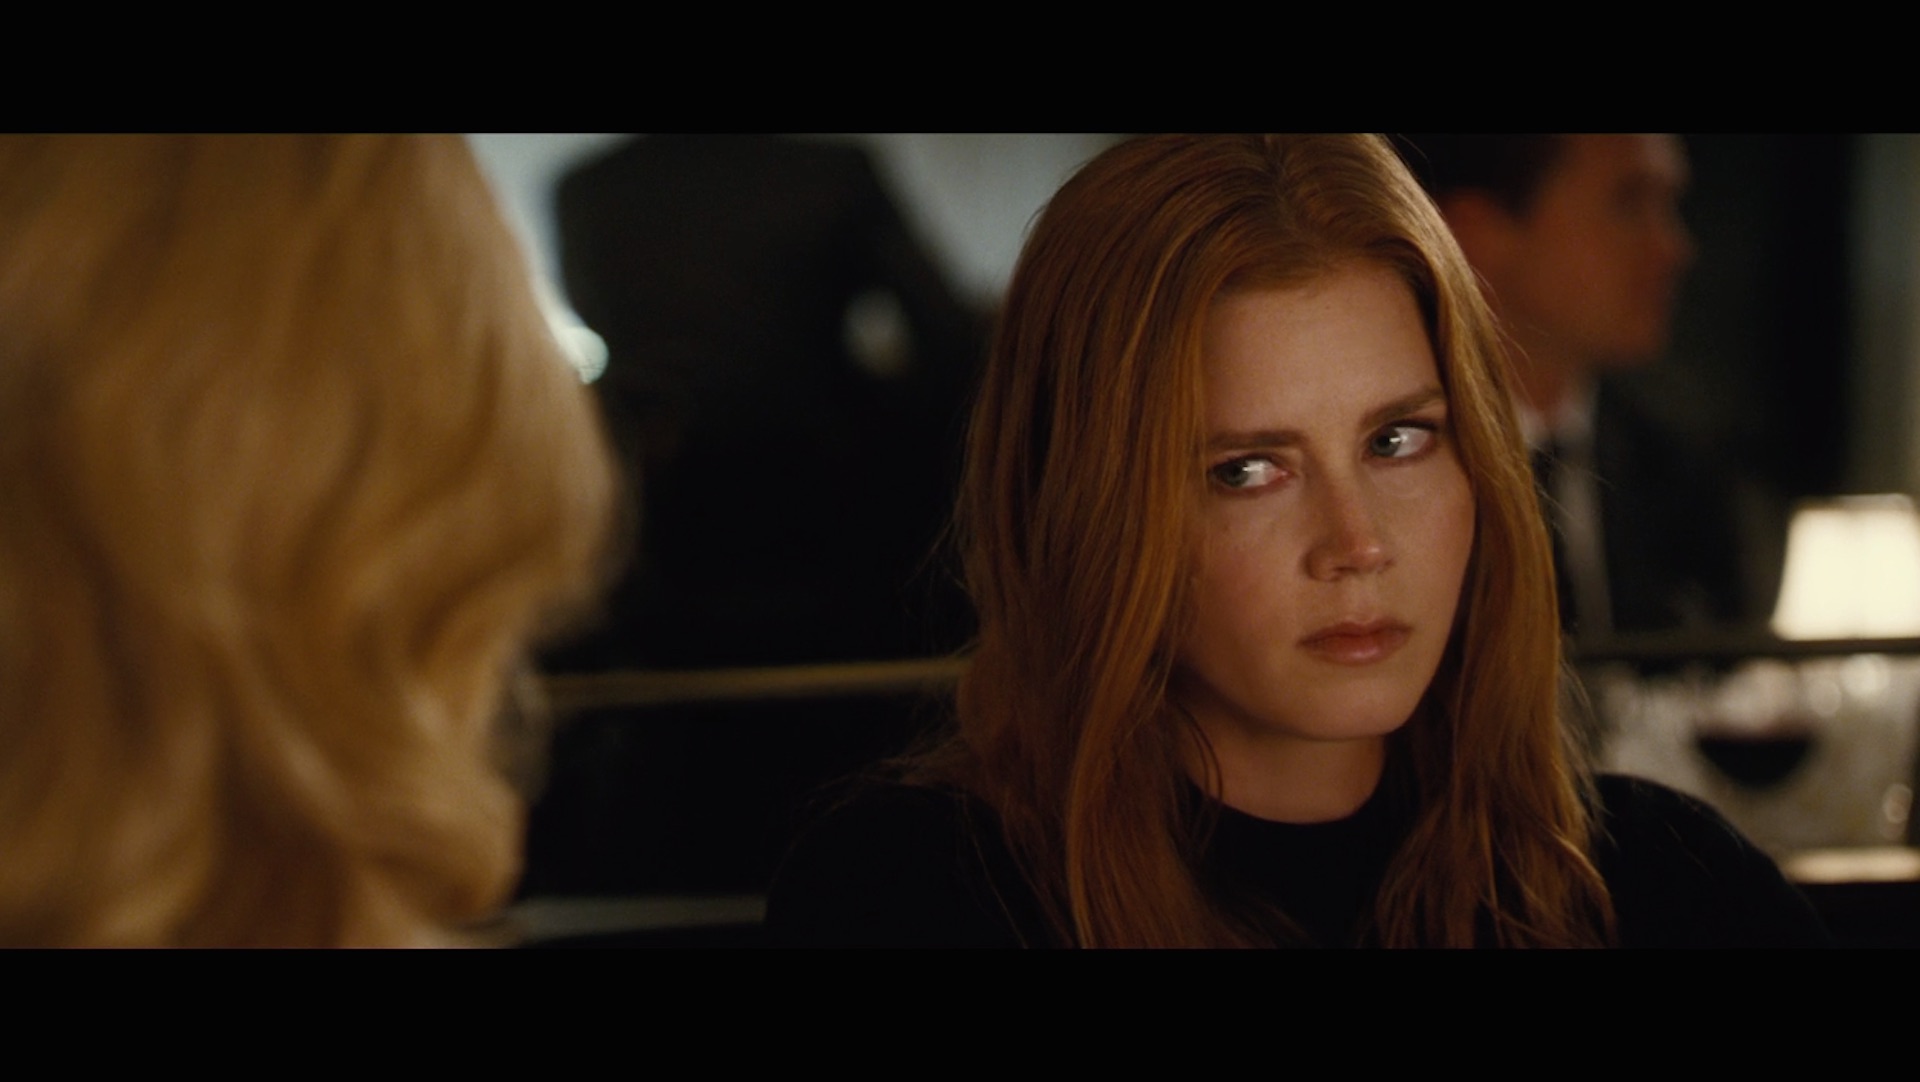 An ex-husband writes his revenge tale in 'Nocturnal Animals' - The  Washington Post